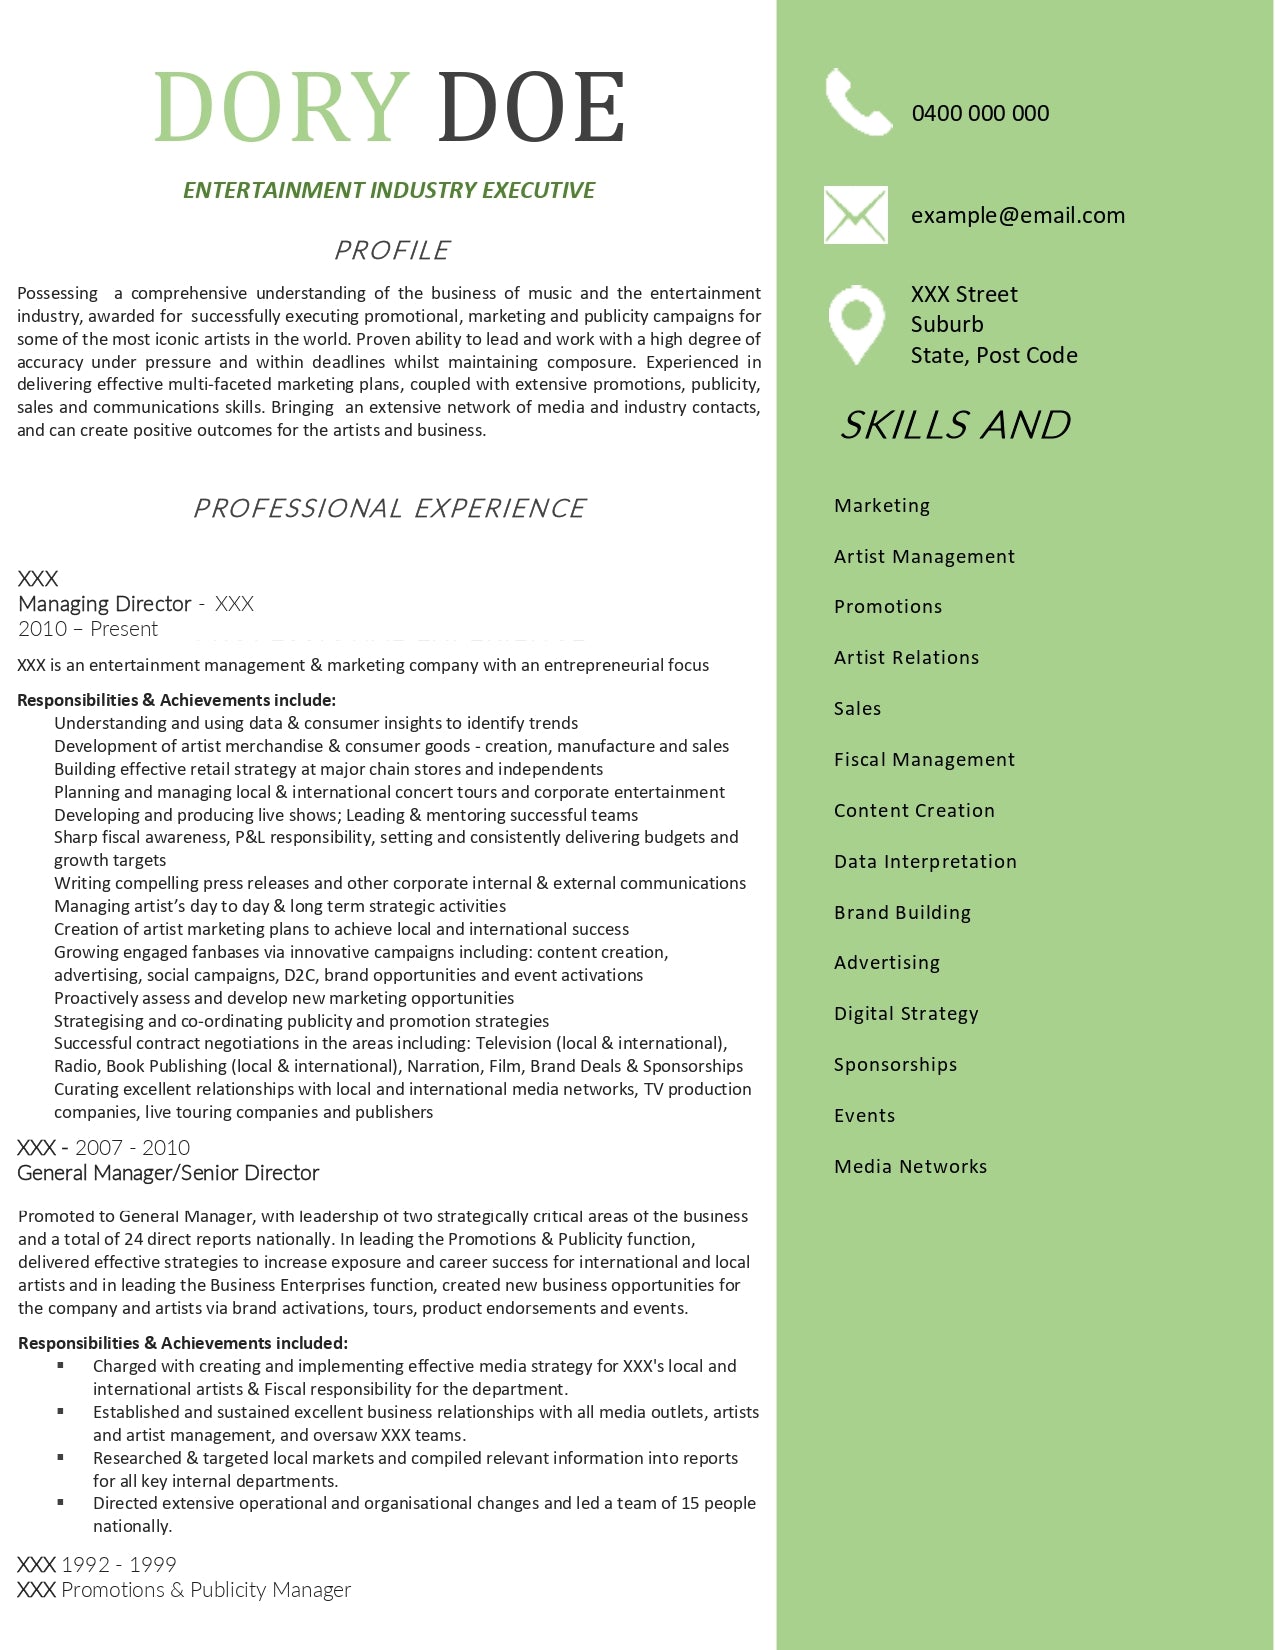 Advertising, Arts, and Media Industry Resume Example (Before) 